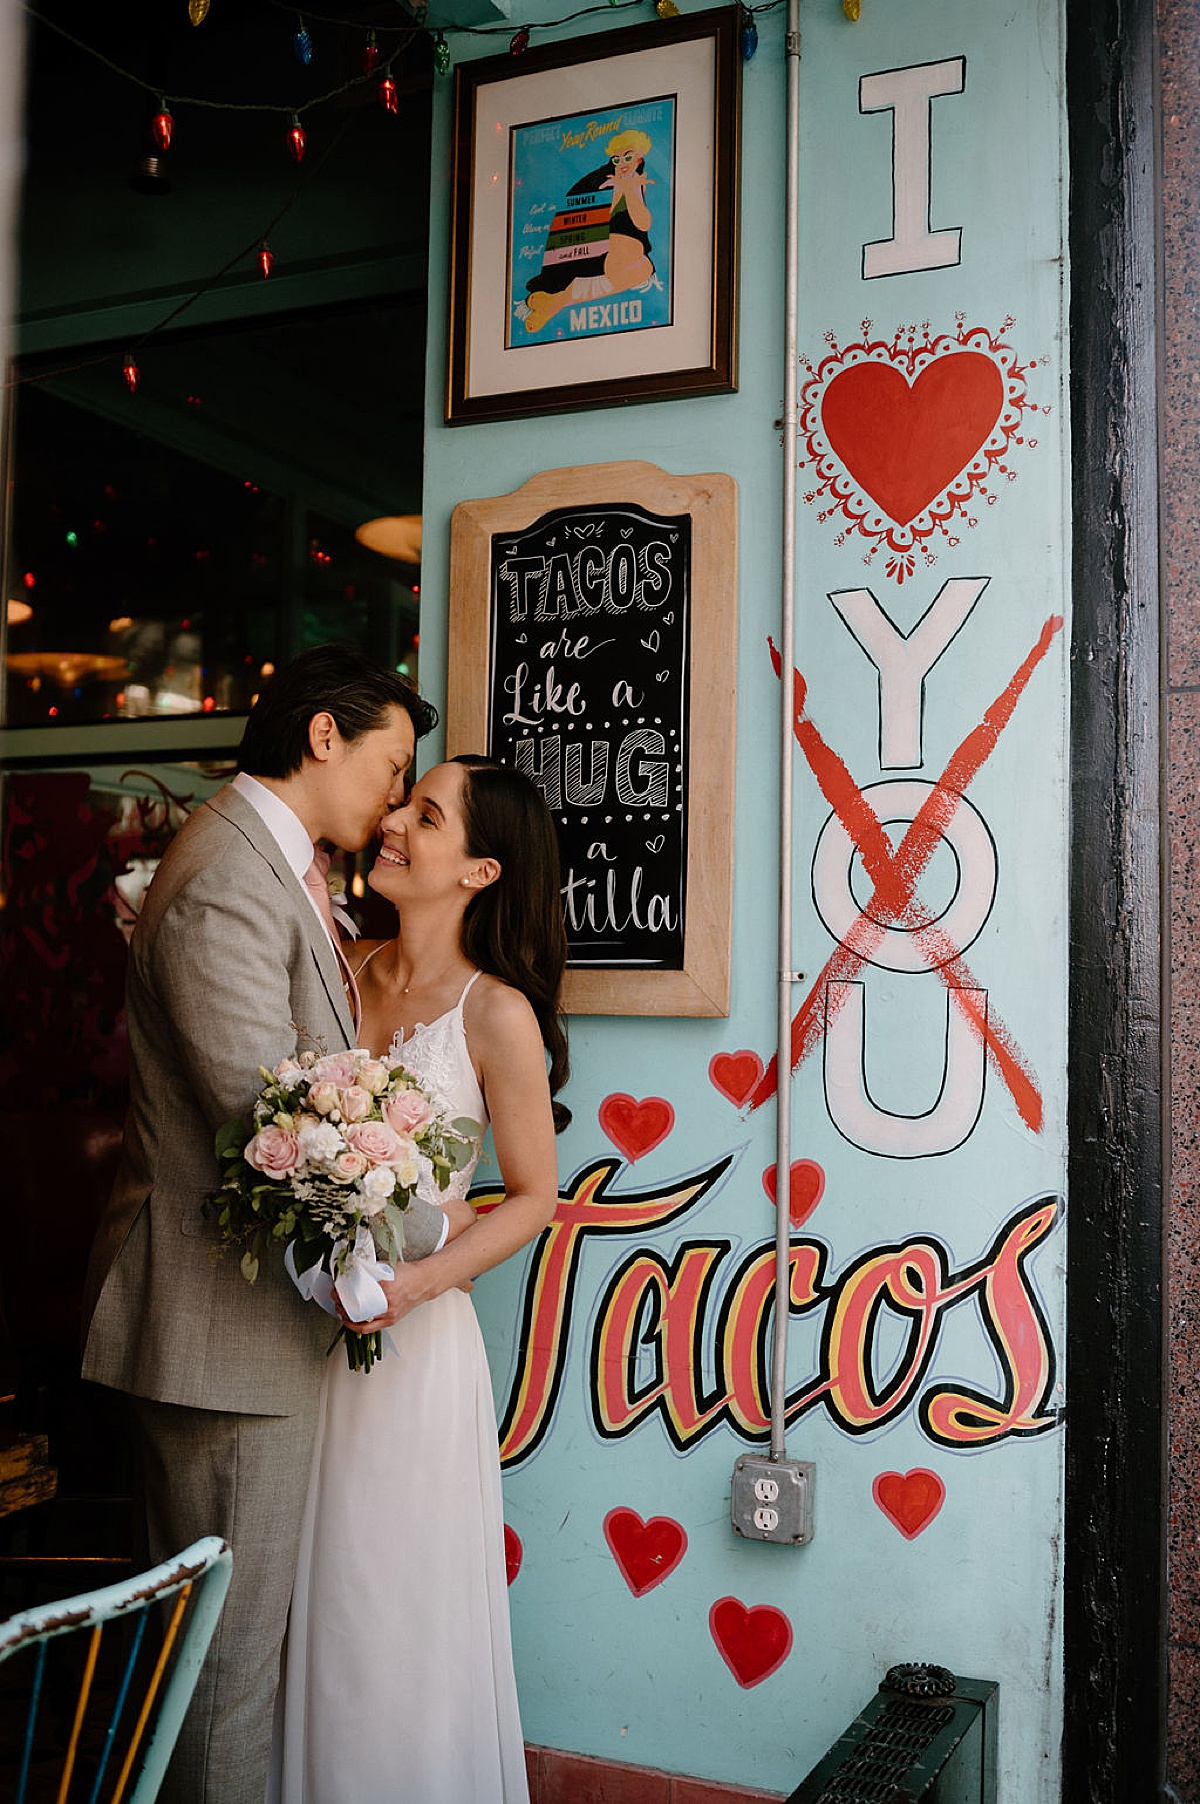 groom in gray suit and pink tie kisses bride in delicate gown on the cheek at taco shop | Chicago wedding photographer